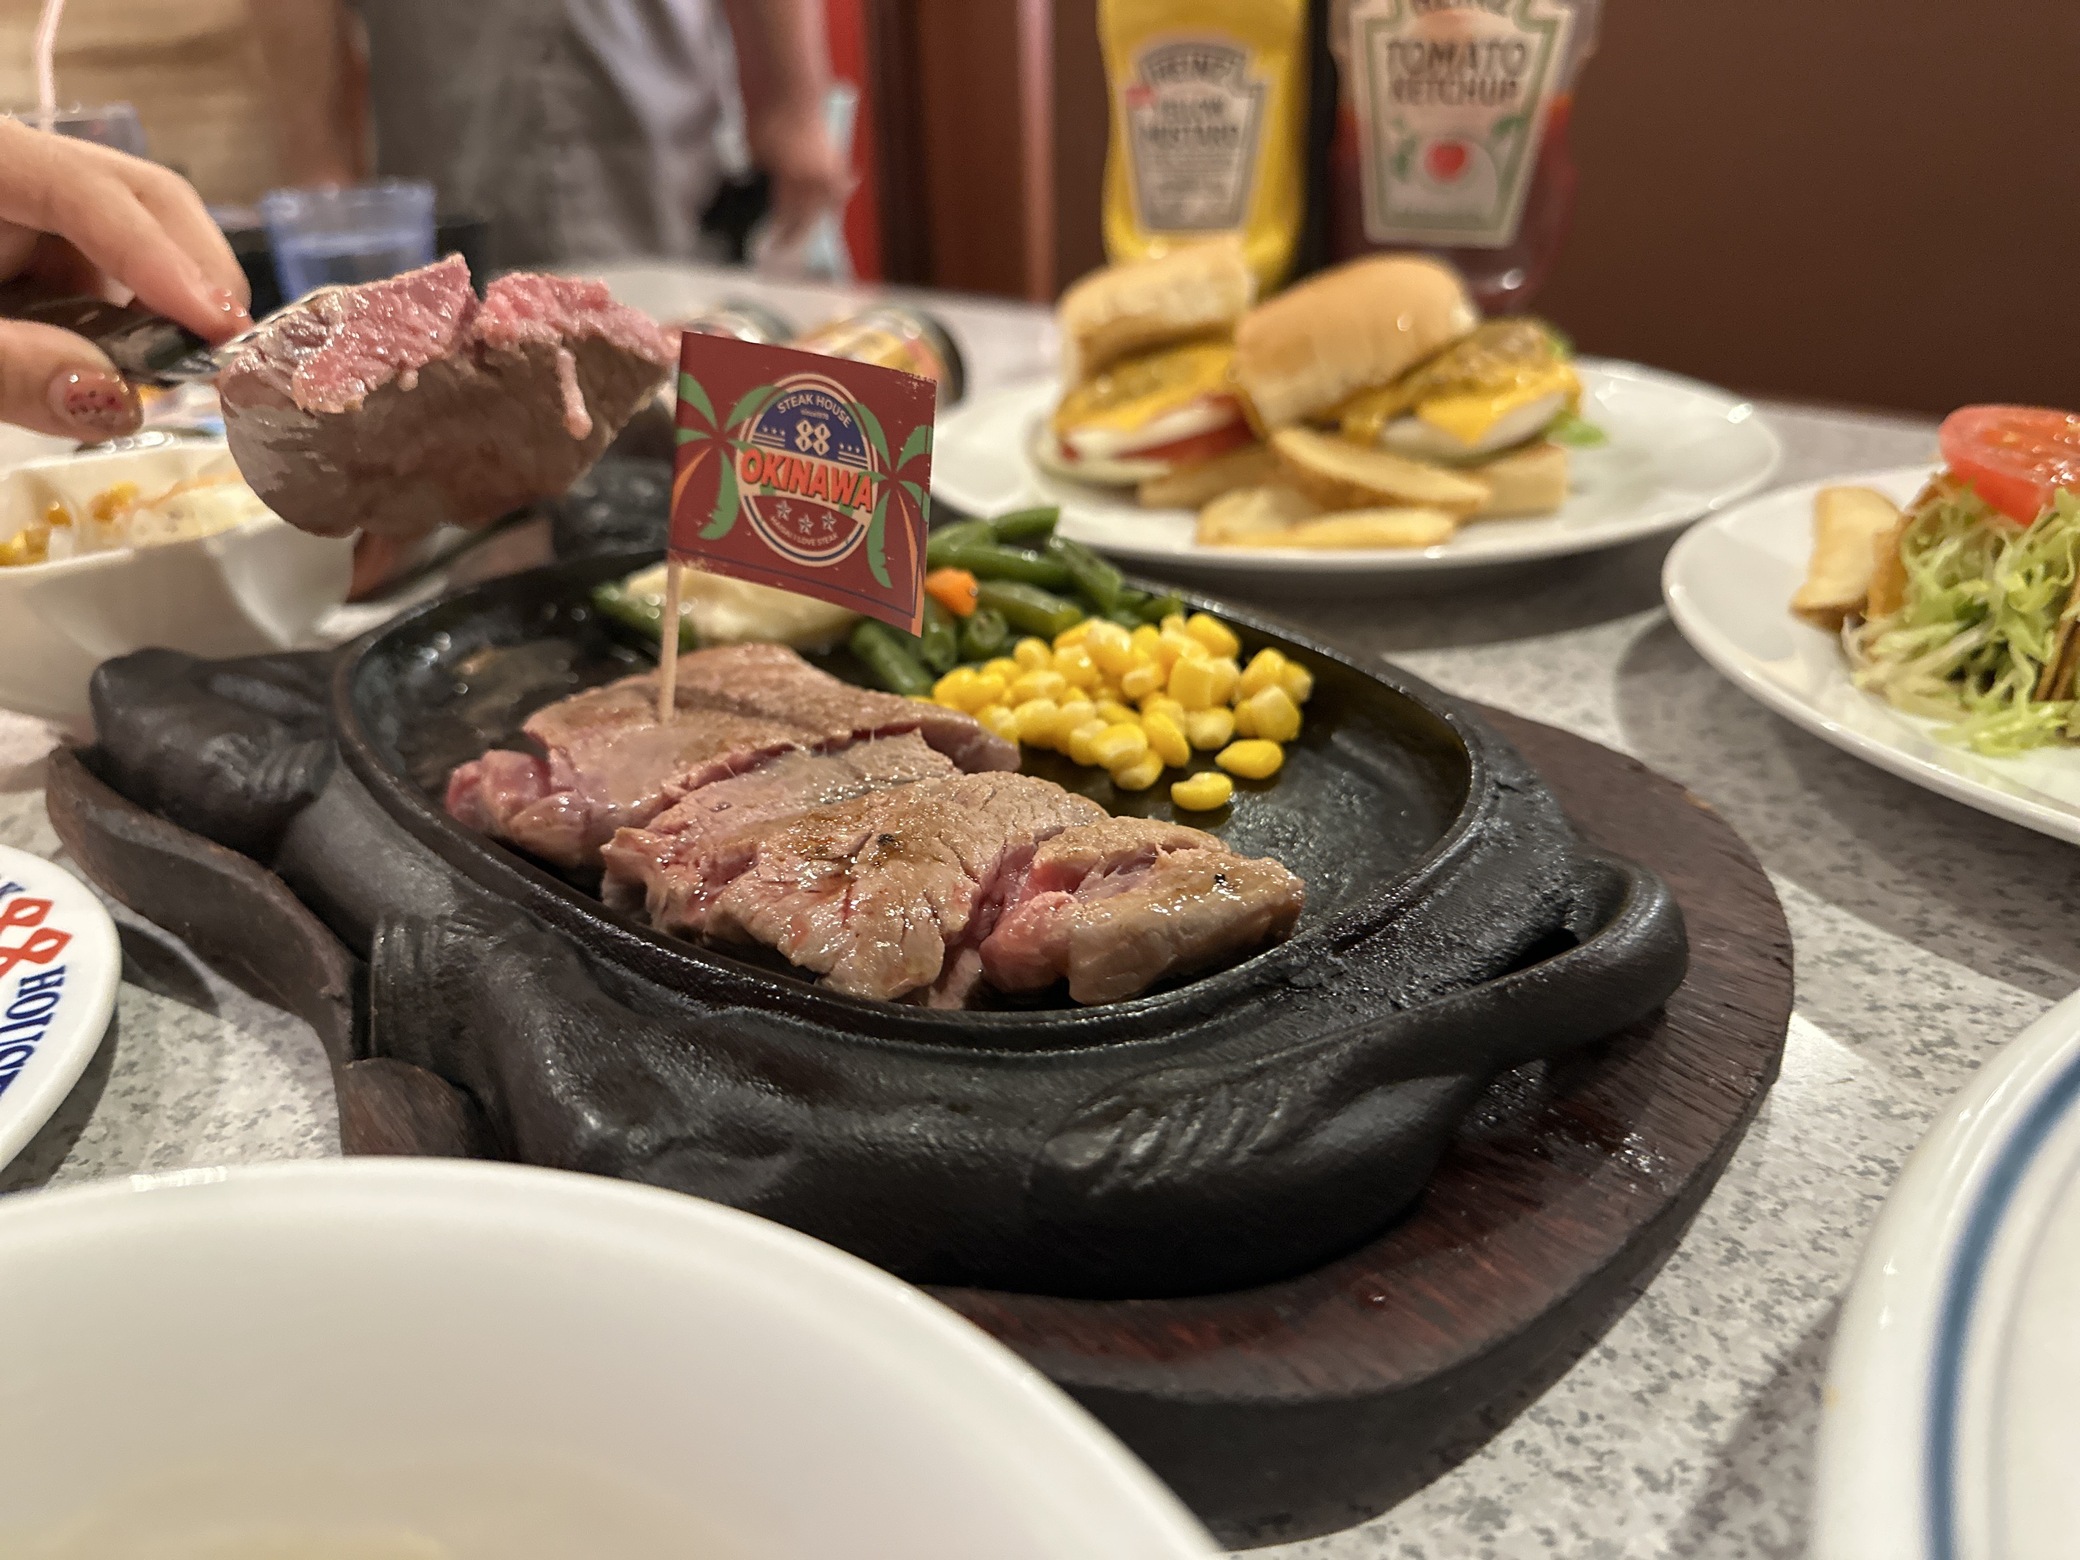 A must-see for children! A famous steak 88 in Okinawa! The side menu is also full and families are very satisfied!